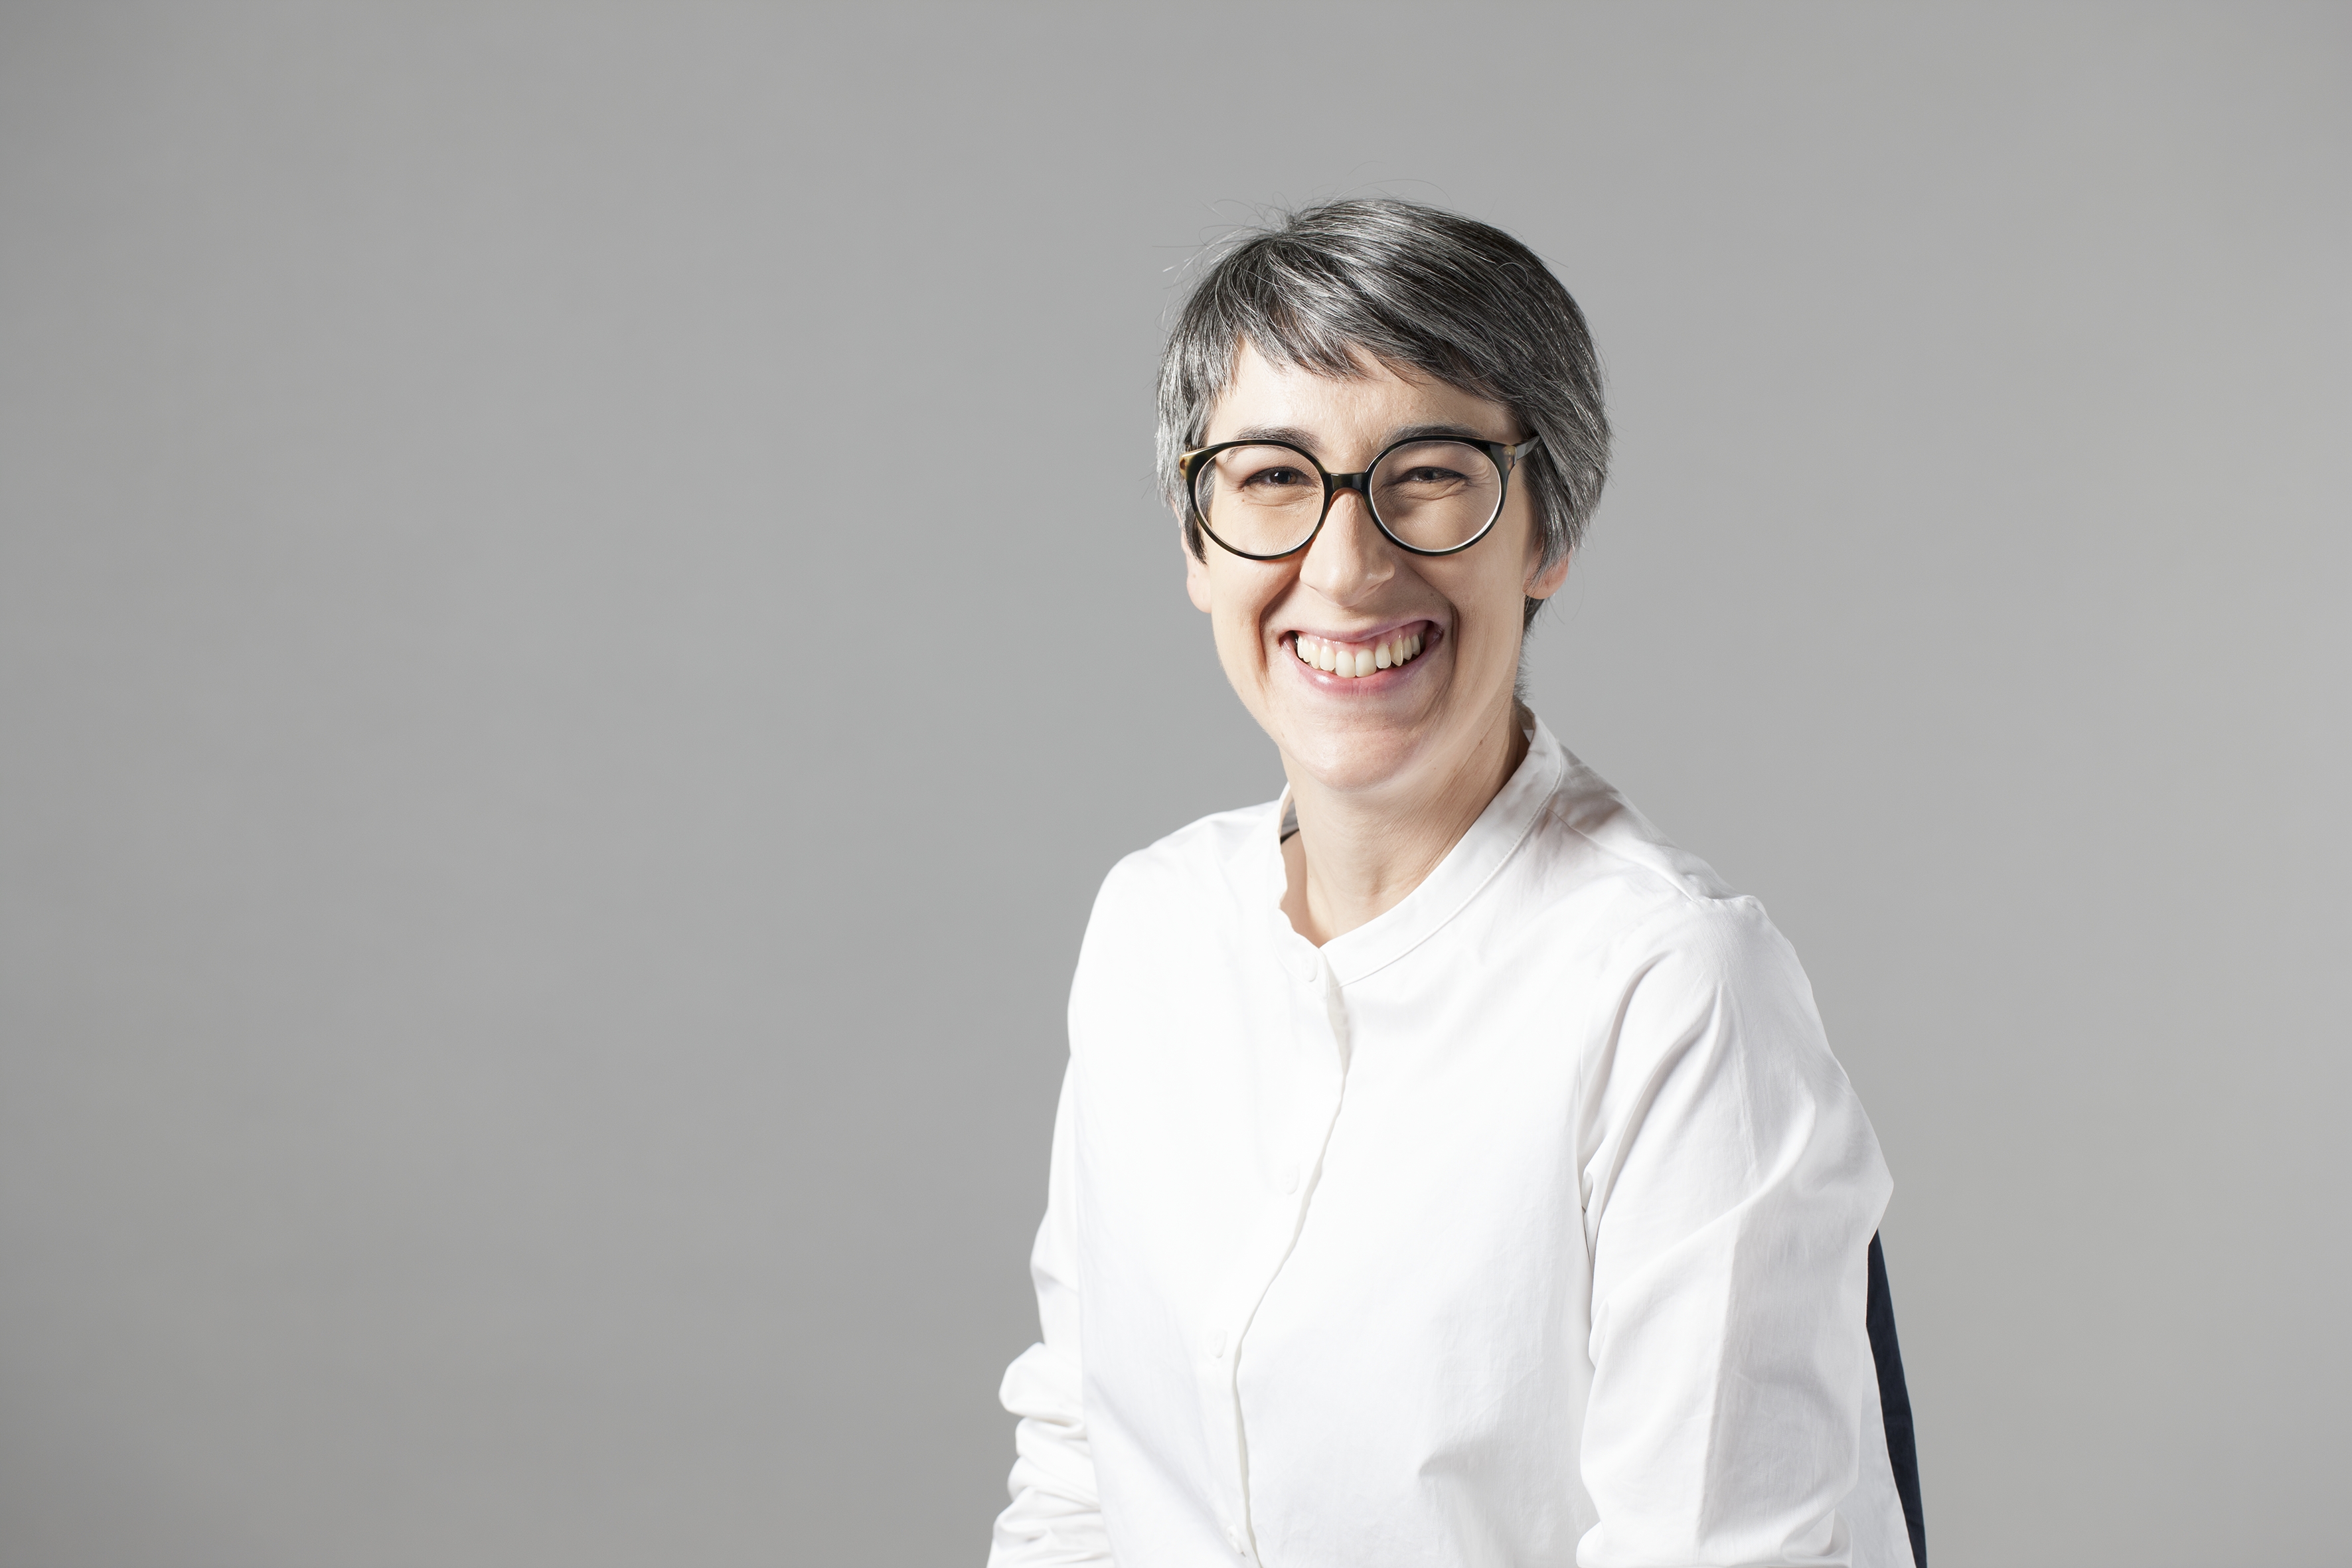 Photograph of a person seated with short grey hair and glasses and a white shirt smiling at the camera